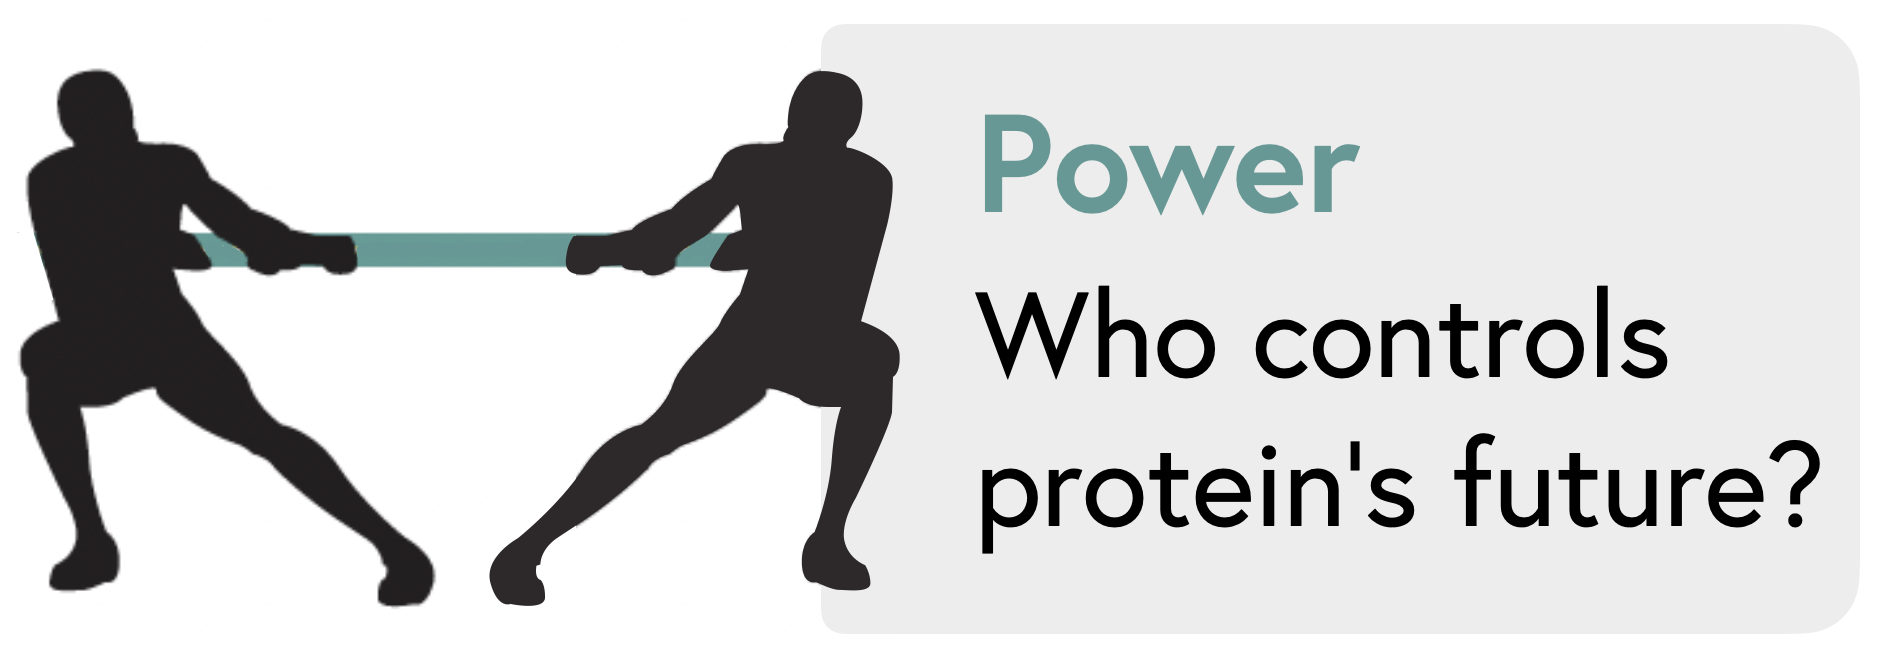 icon showing two people engaged in a tug of war with the caption "Power: Who controls protein's future?"